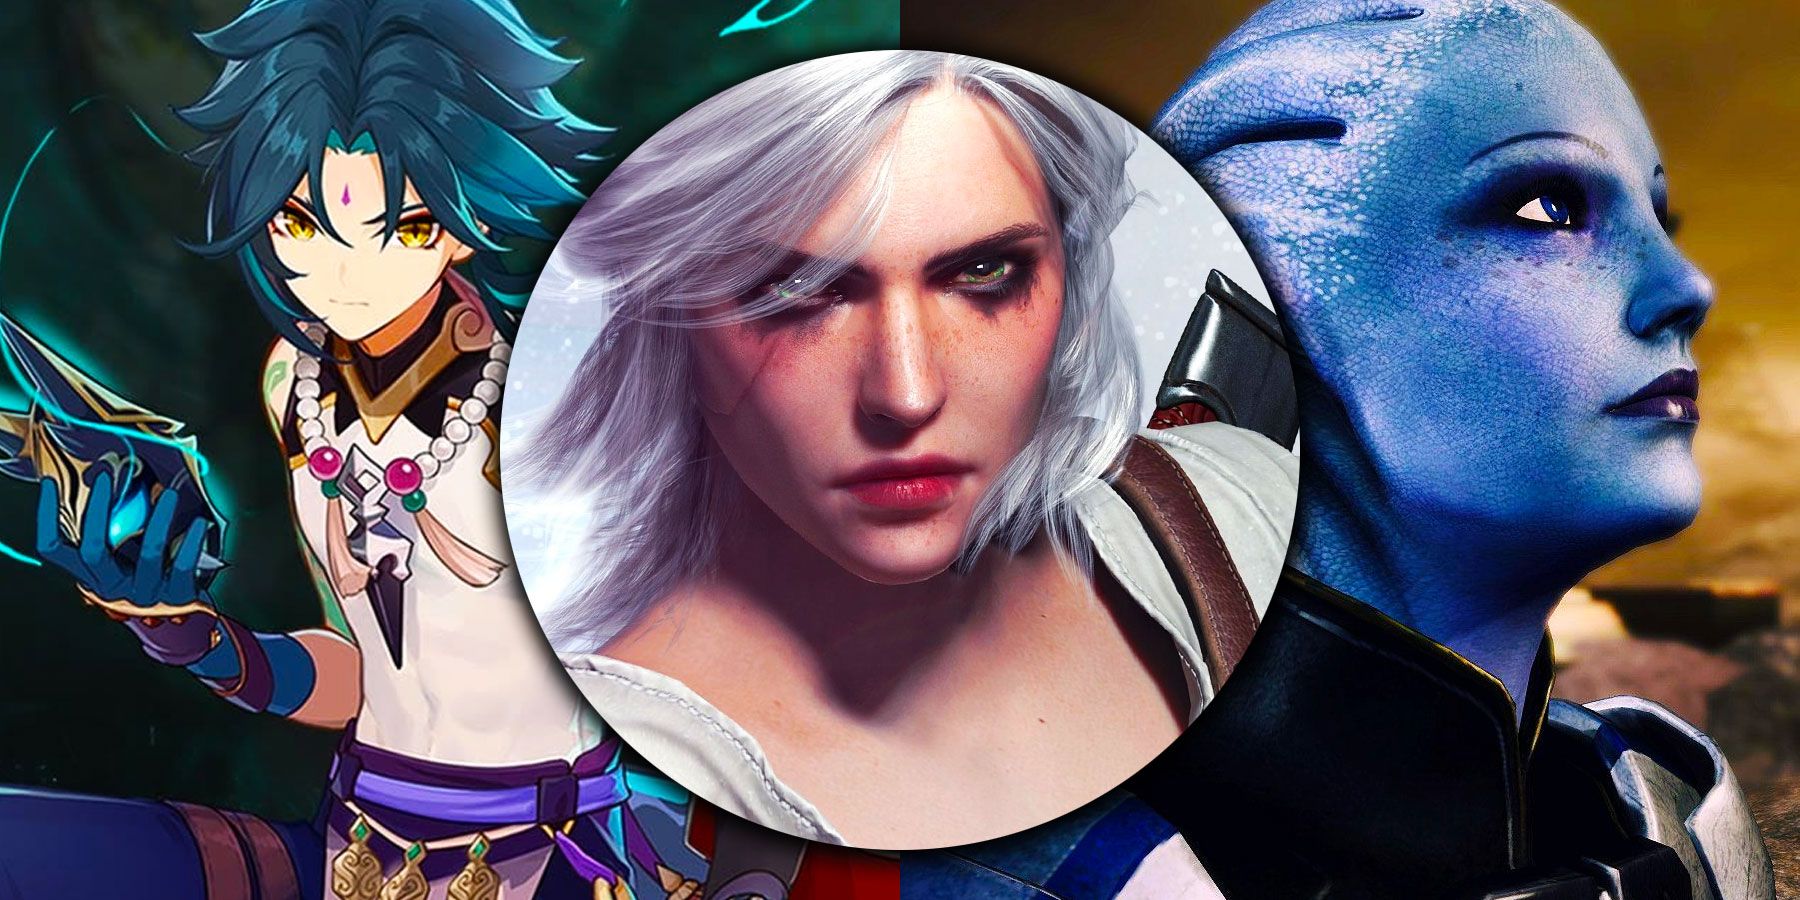 A split image of Xiao from Genshin Impact, Ciri from The Witcher 3, and Liara T'Soni from Mass Effect collage image